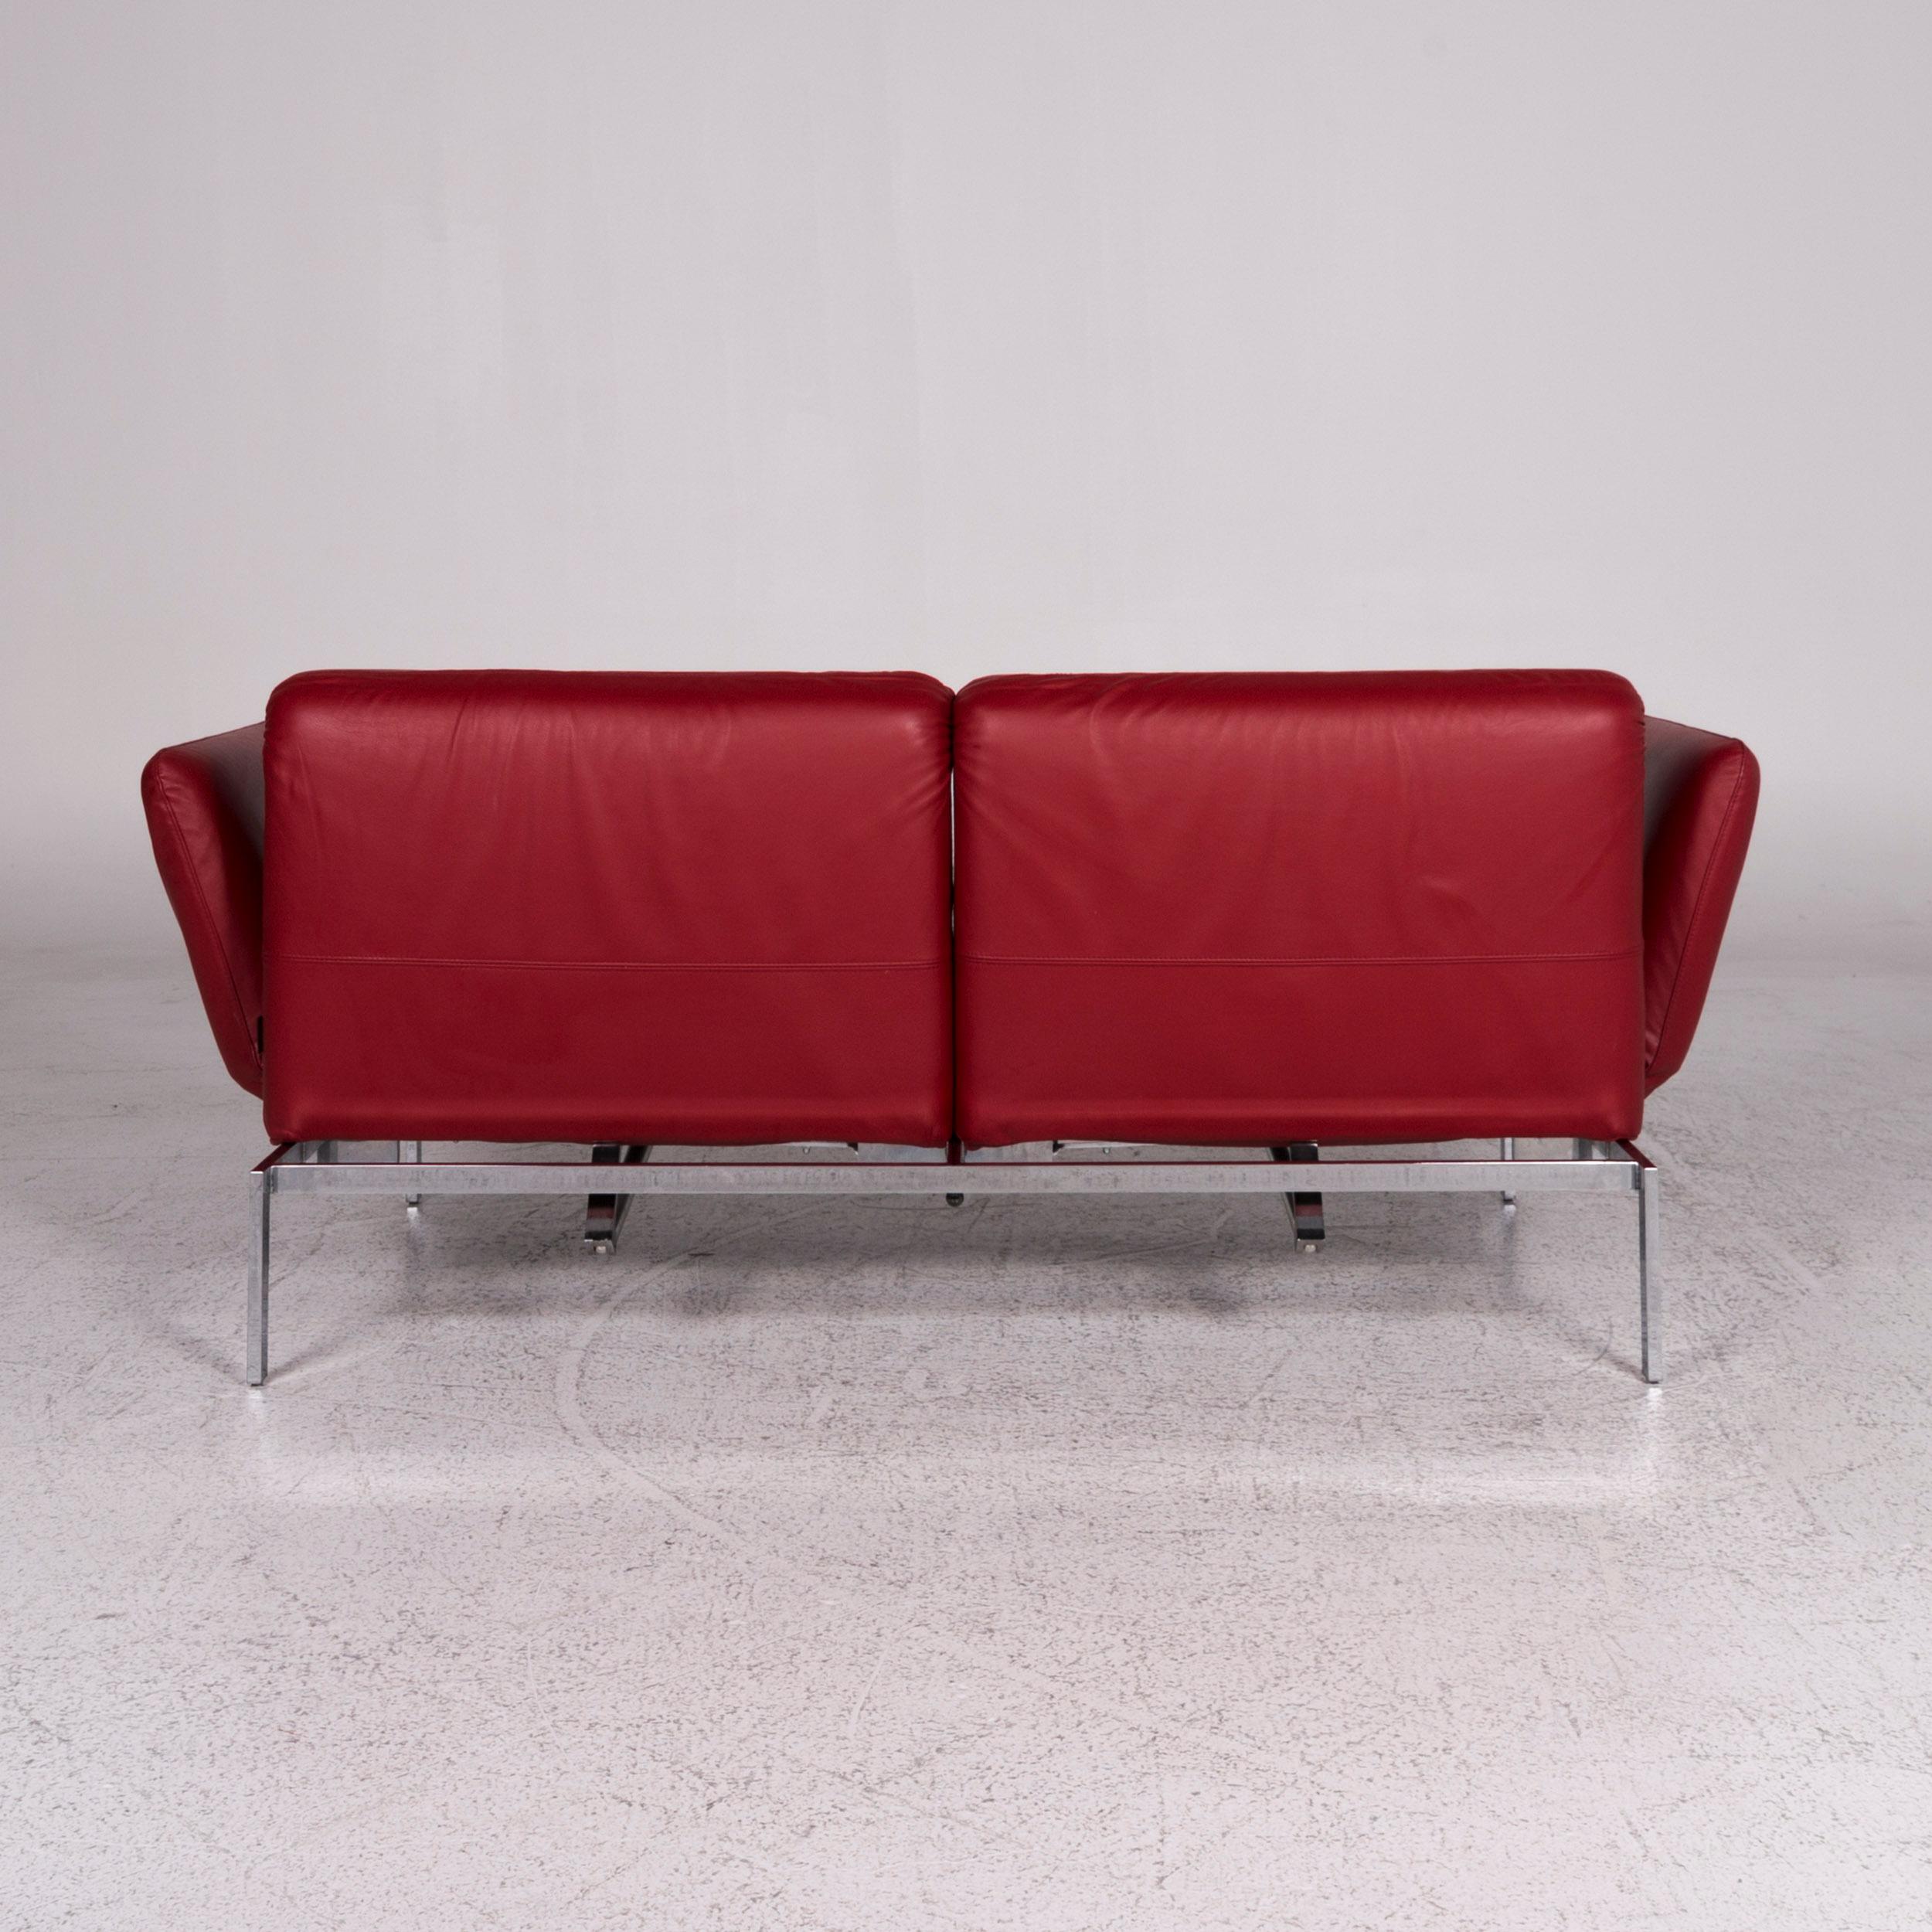 Brühl & Sippold Roro Designer Leather Sofa Red Two-Seat Relax Function Couch 7